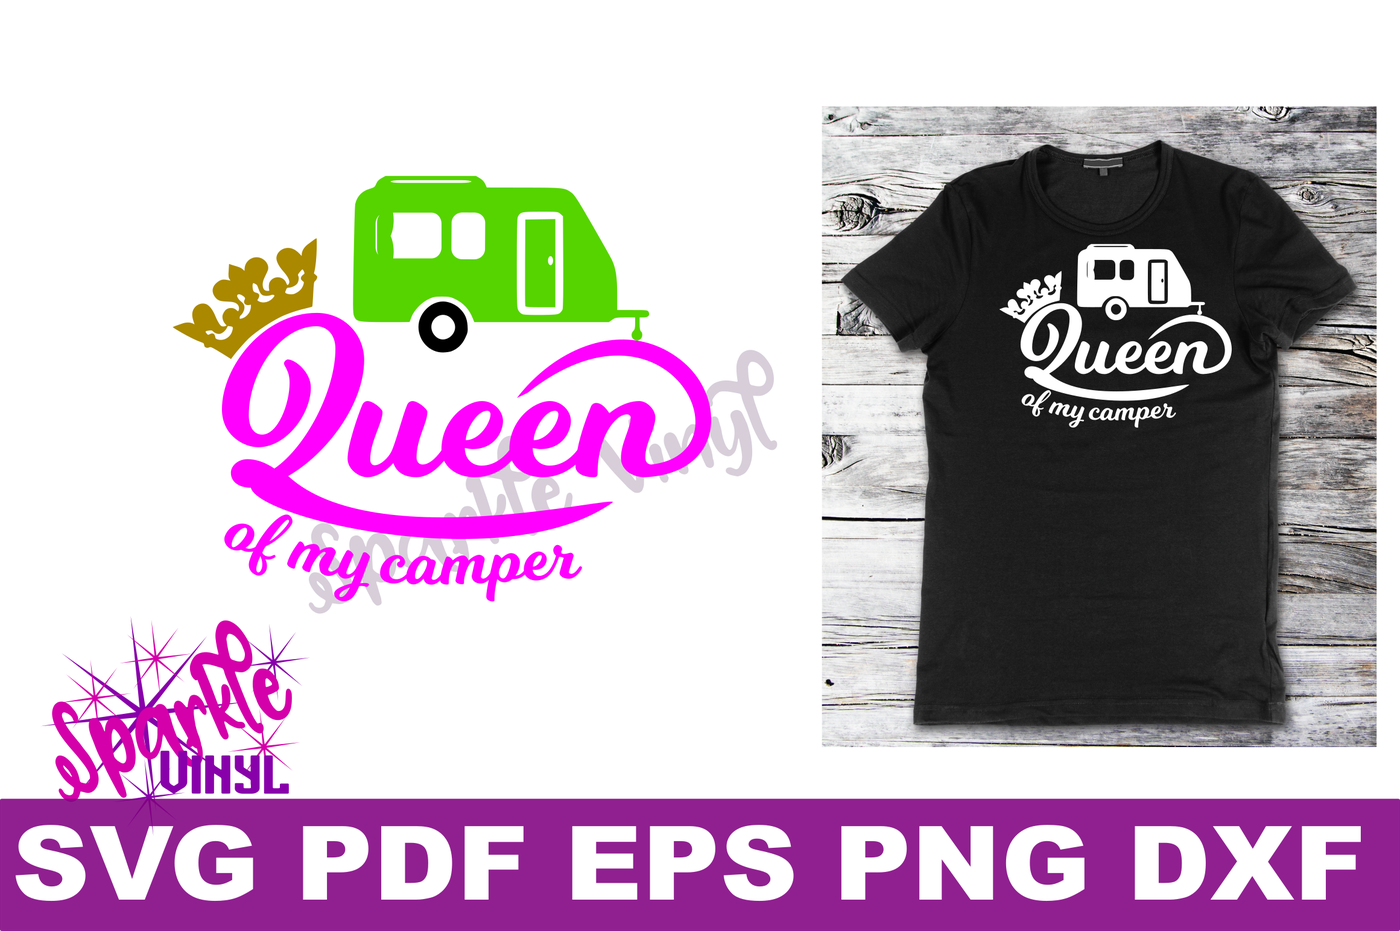 Download Svg Camp Camper Camping Queen Of My Camper Svg Files For Cricut Or Silhouette Dxf Eps Png Pdf Cut File Or Printable To Frame By Sparkle Vinyl Designs Thehungryjpeg Com